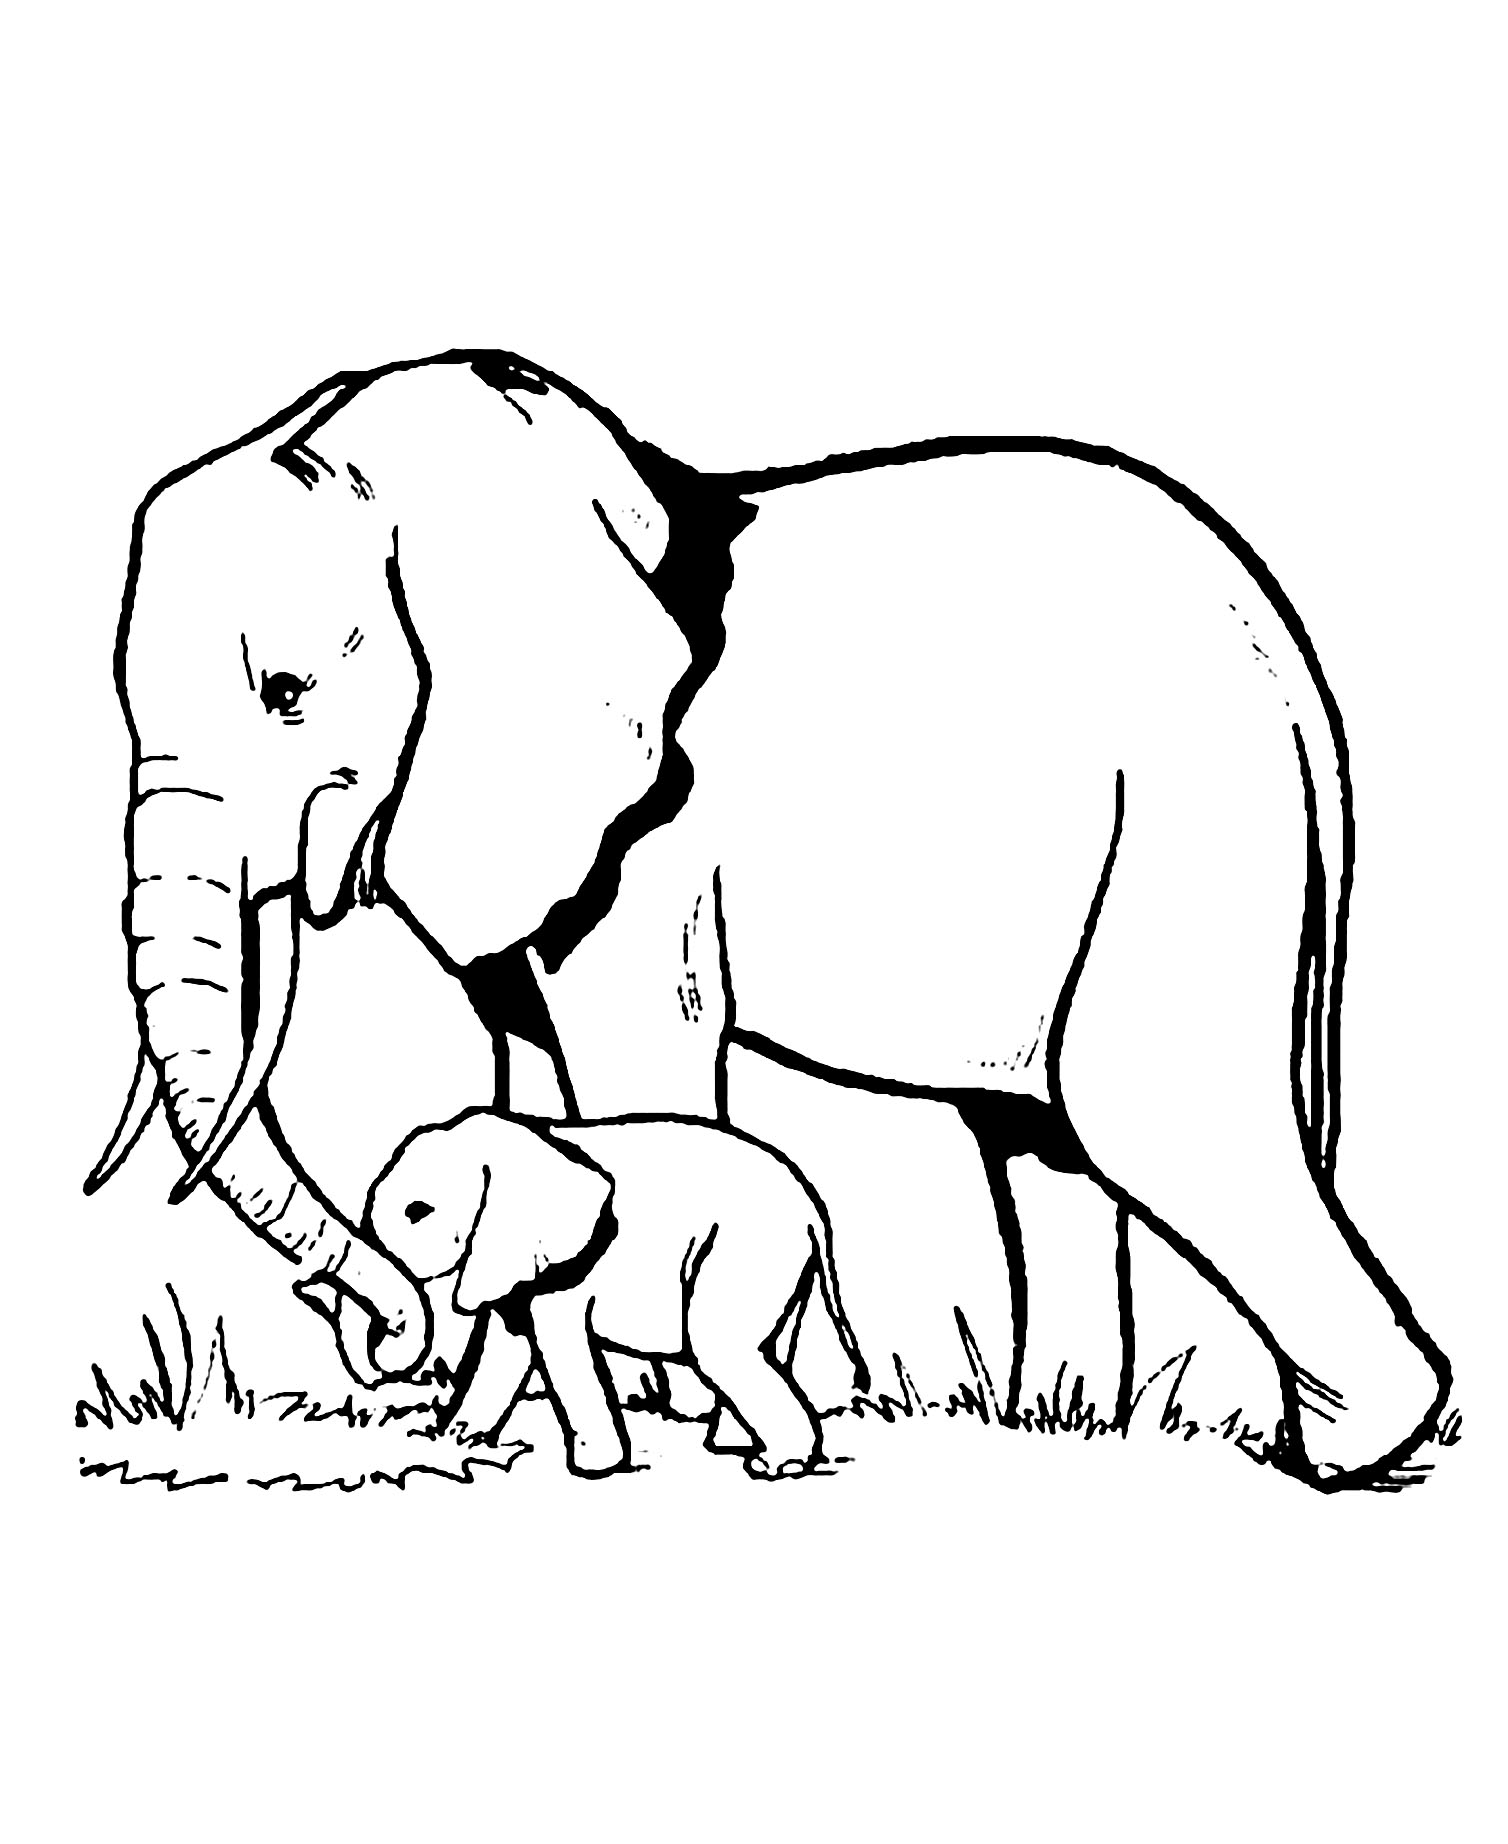 Elephant coloring pages to download for free - Elephants Kids Coloring